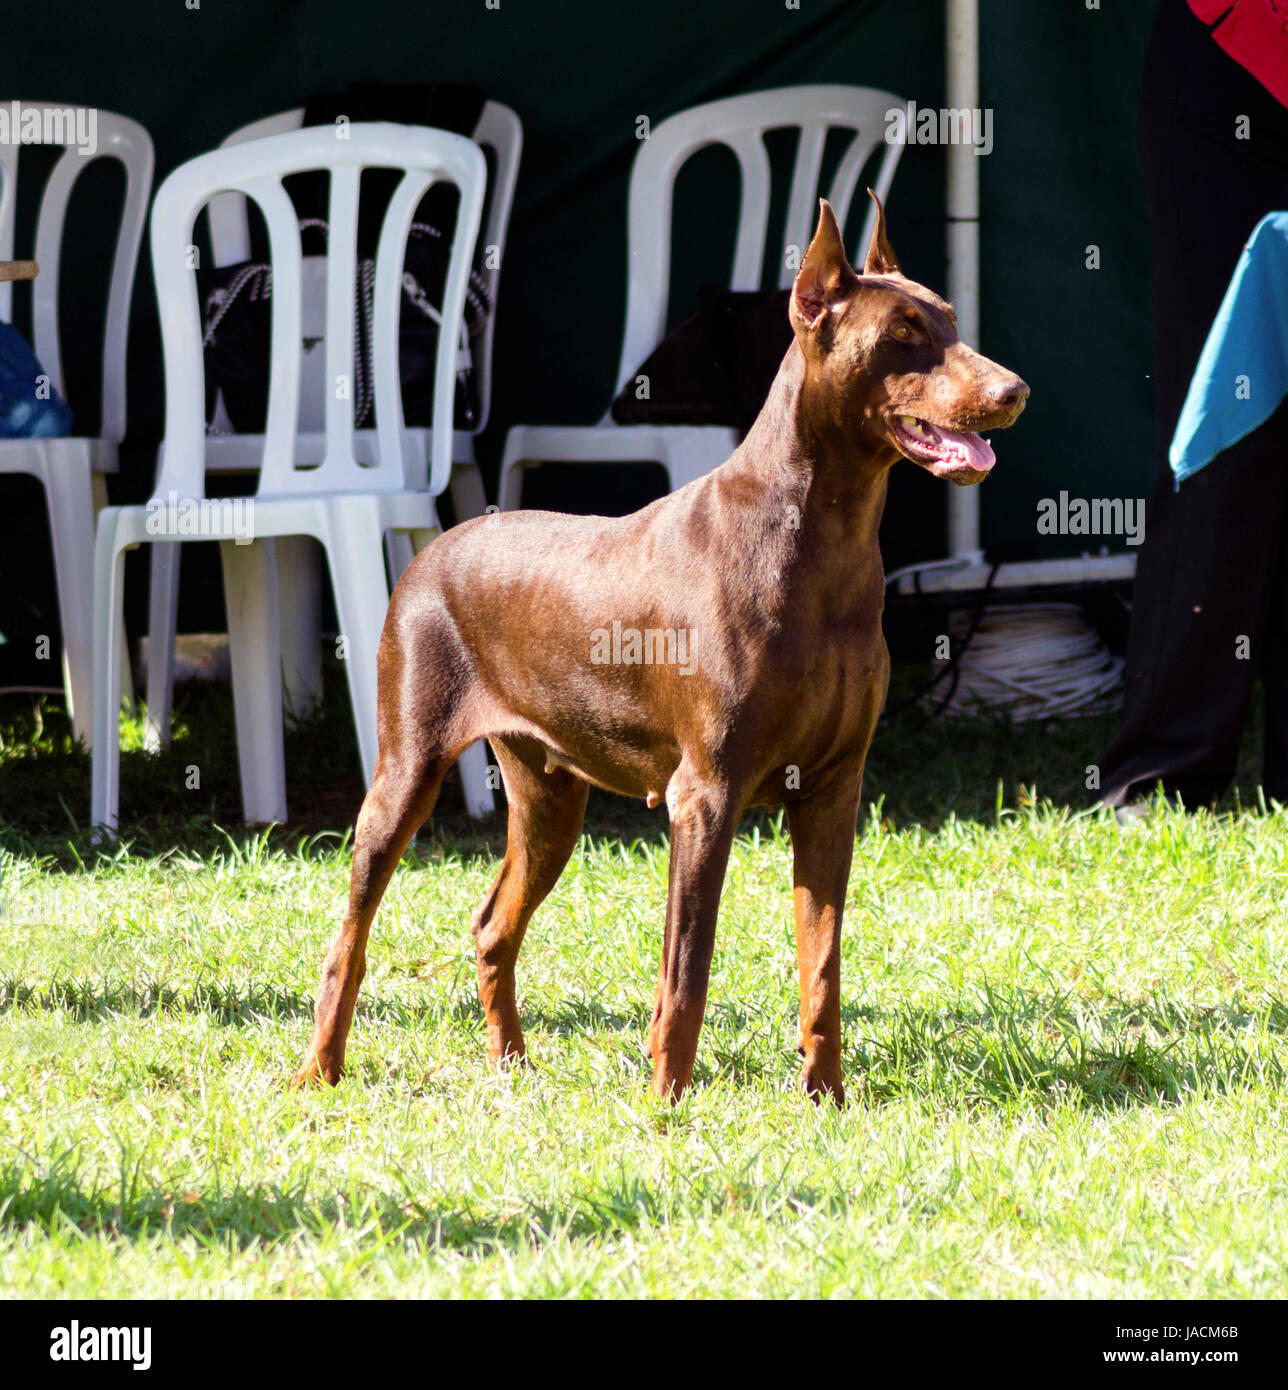 A young, beautiful, brown Doberman Pinscher standing on the lawn while sticking its tongue out and looking happy and playful. This Dobermann has its ears cropped and tail docked. Stock Photo